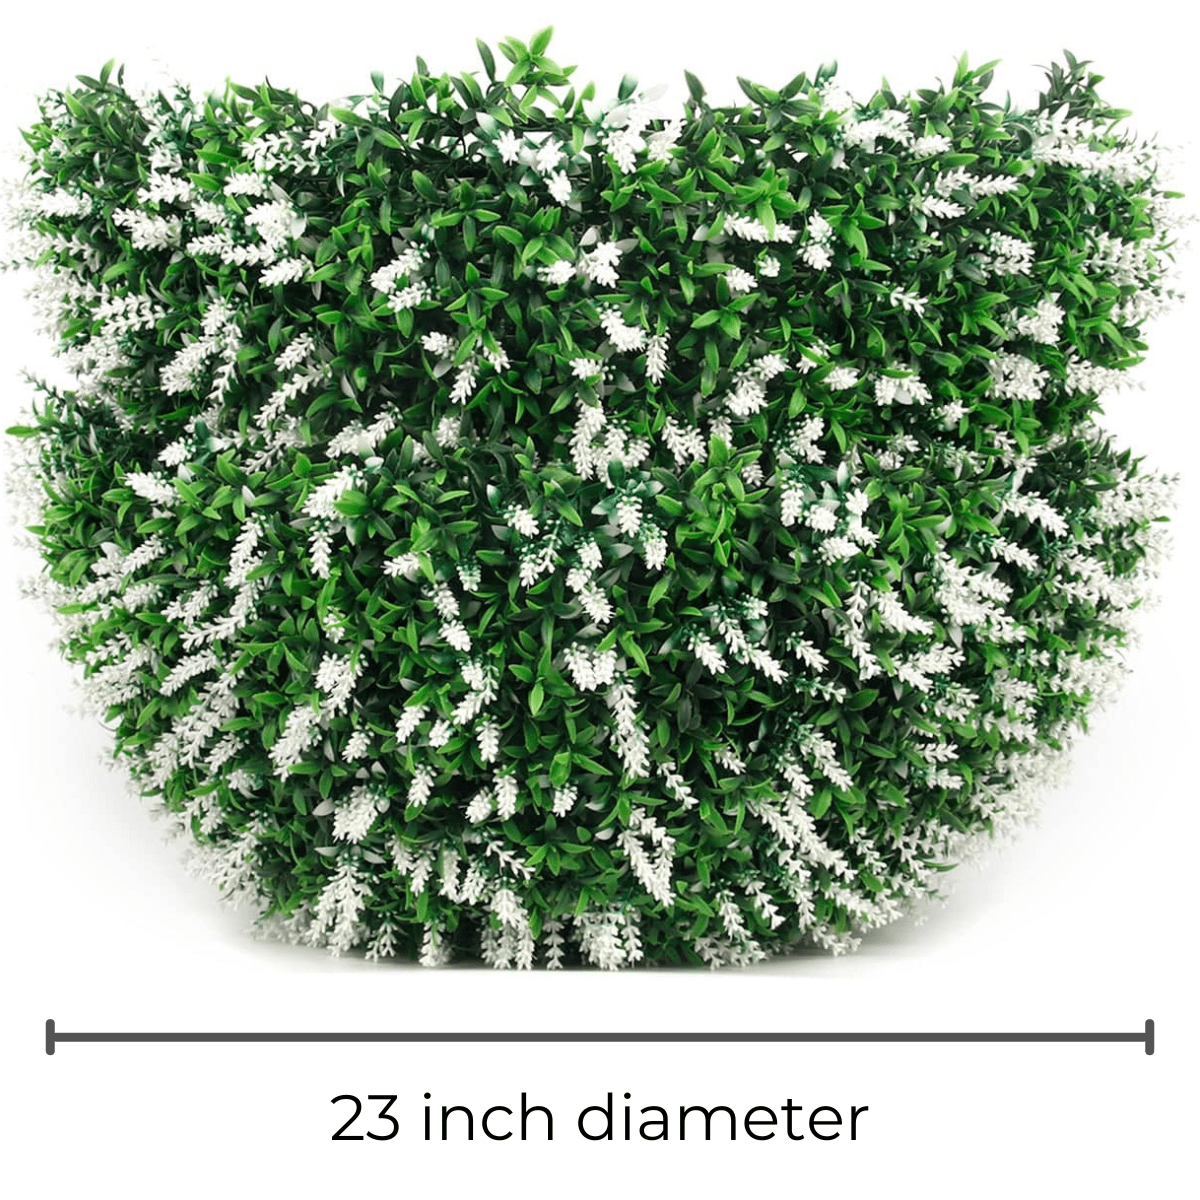 365 Curb Appeal Topiary ball 23" XL White Lavender Topiary Ball